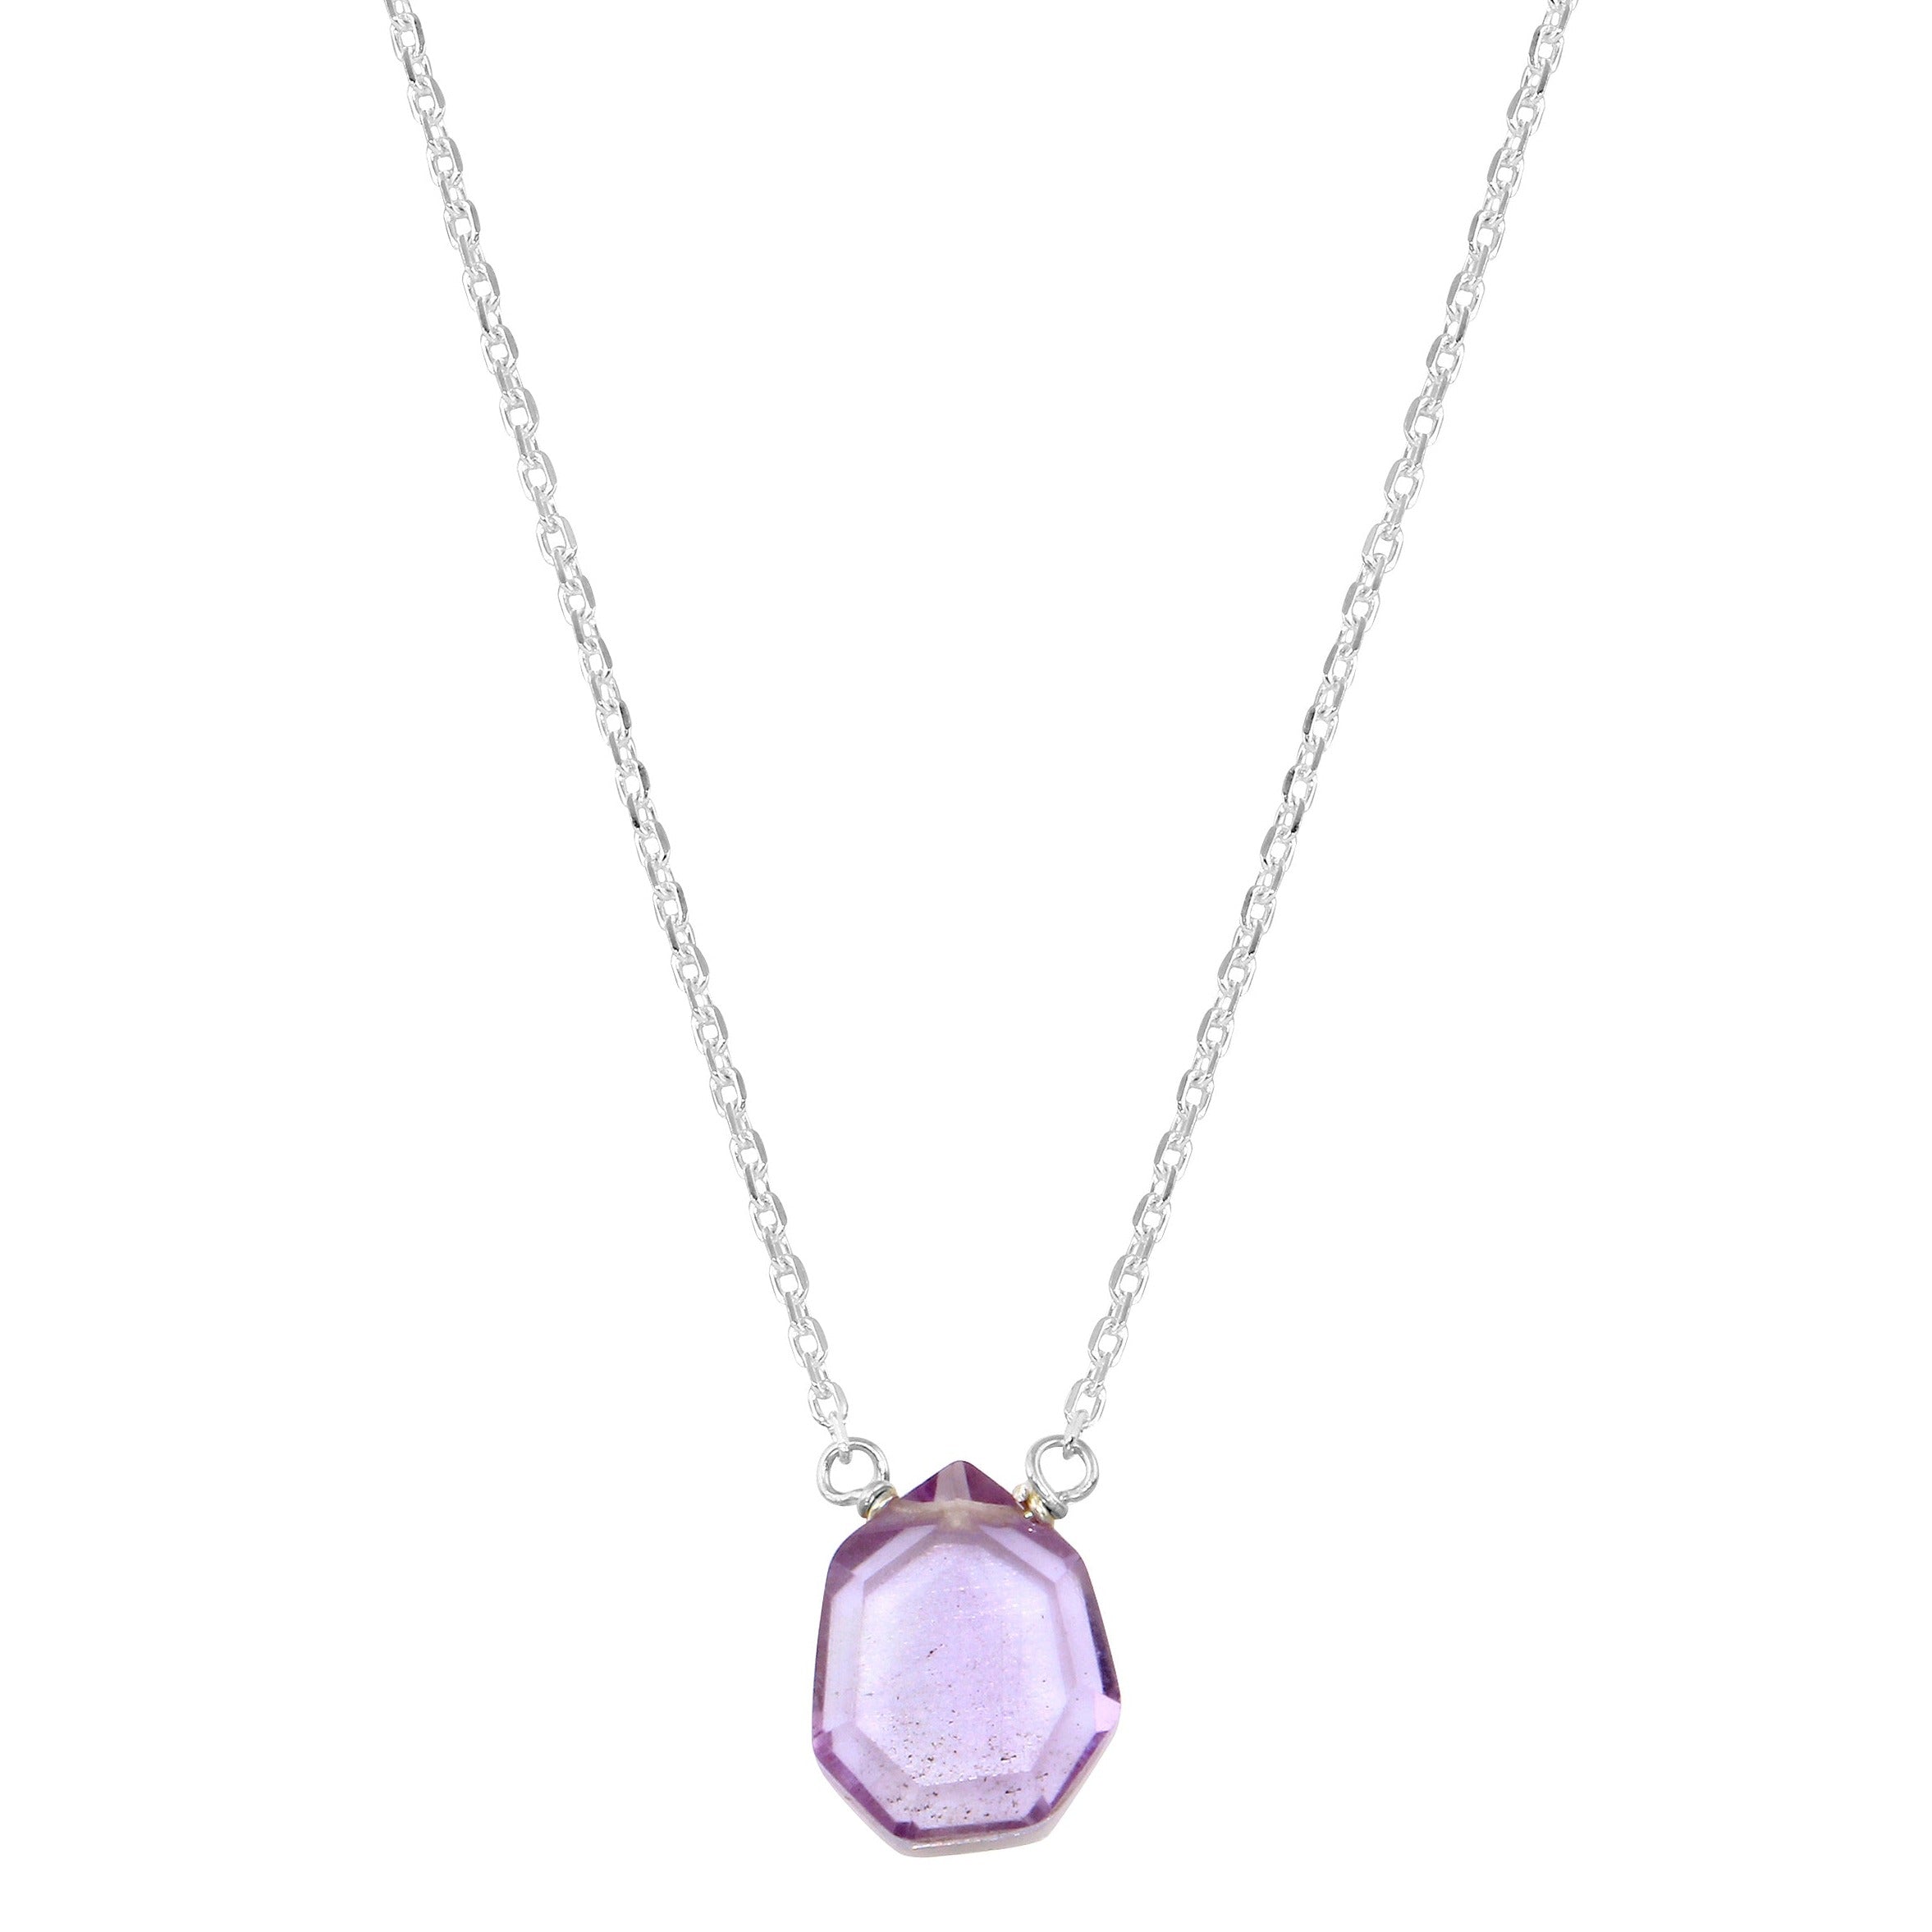 Pink Amethyst flat geo cut necklace - sterling silver or gold filled | Little Rock Collection necklace Amanda K Lockrow